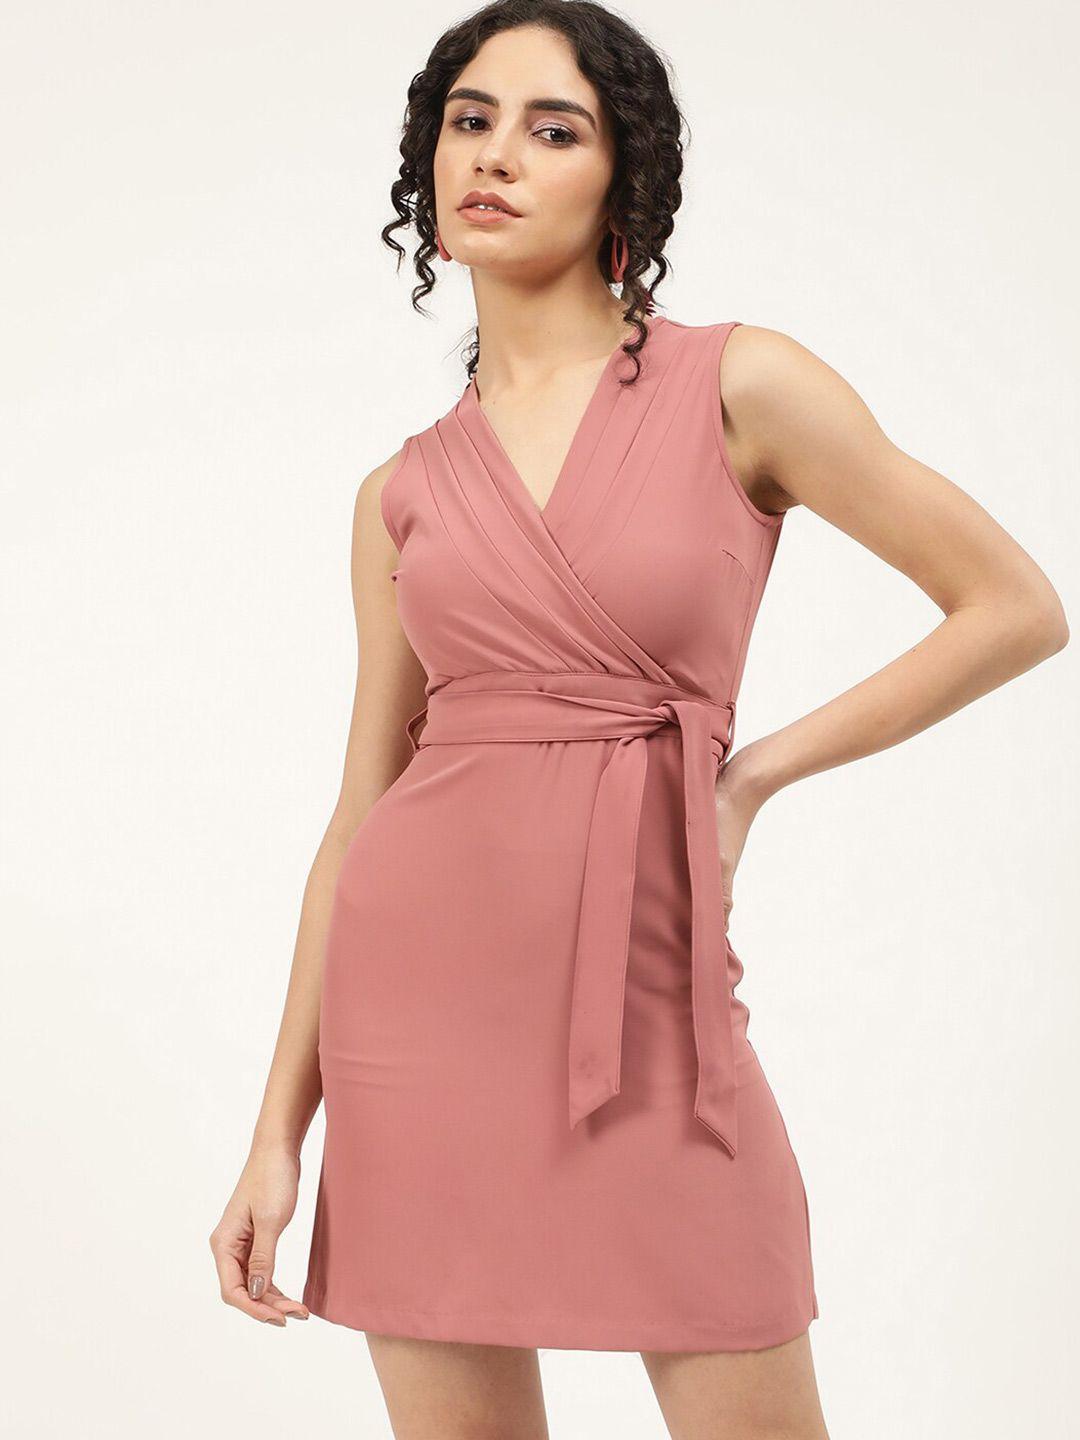 centrestage-rust-solid-sleeveless-casual-wrap-dress